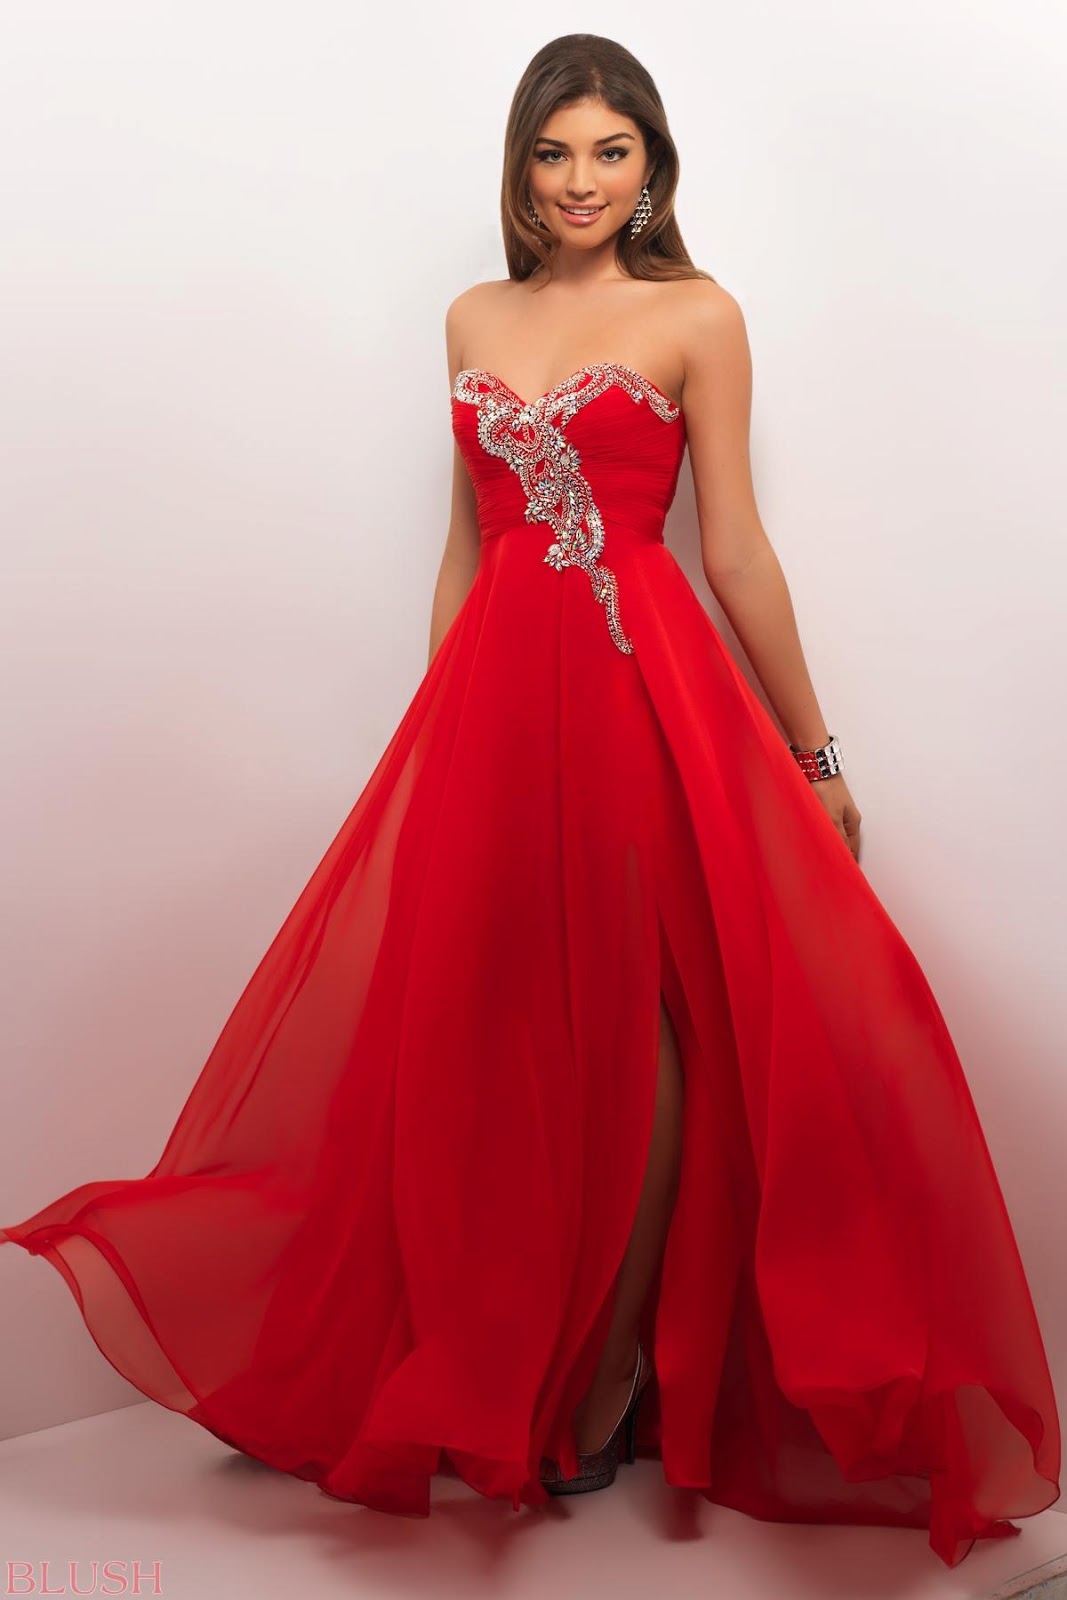 2013 Prom Dresses Collection From Blush Prom | The Fashion Styles